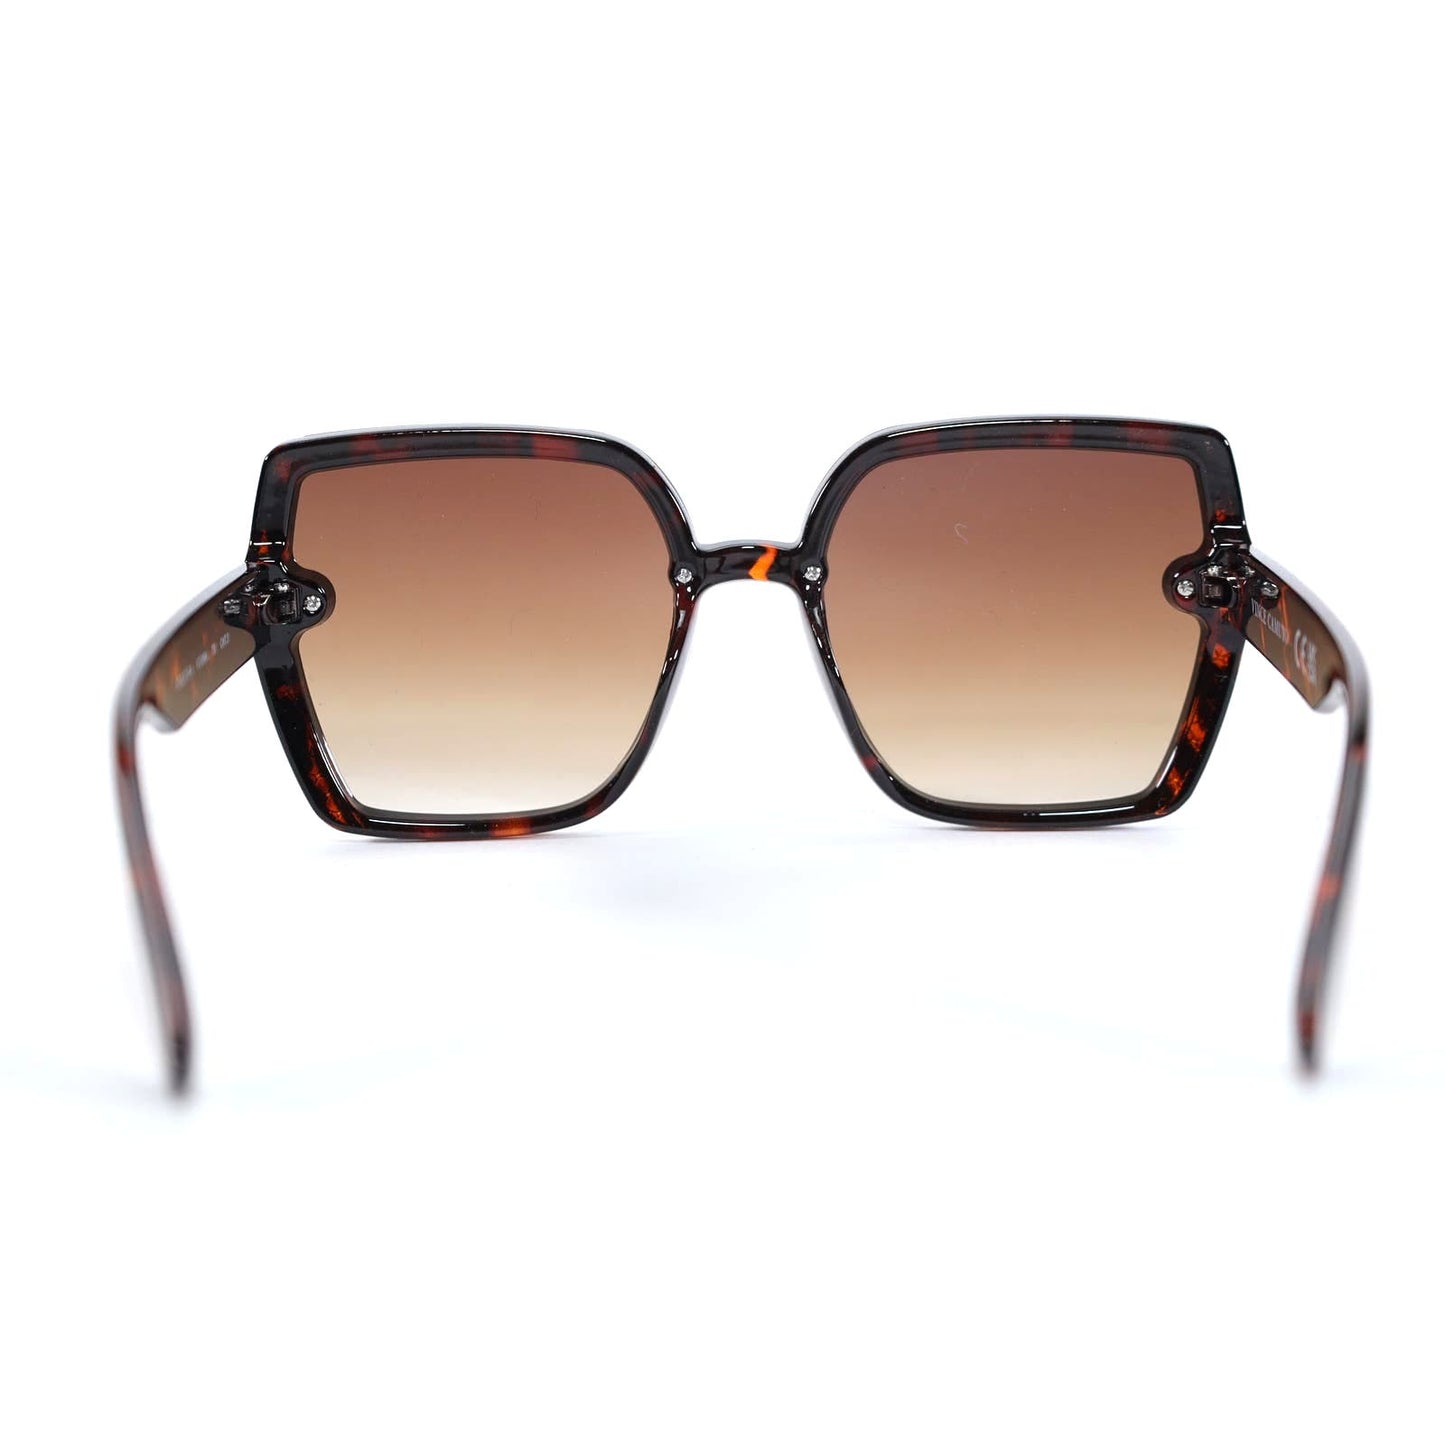 Vince Camuto Oversized Geometric Sunglassses - Brown/Brown Gradient